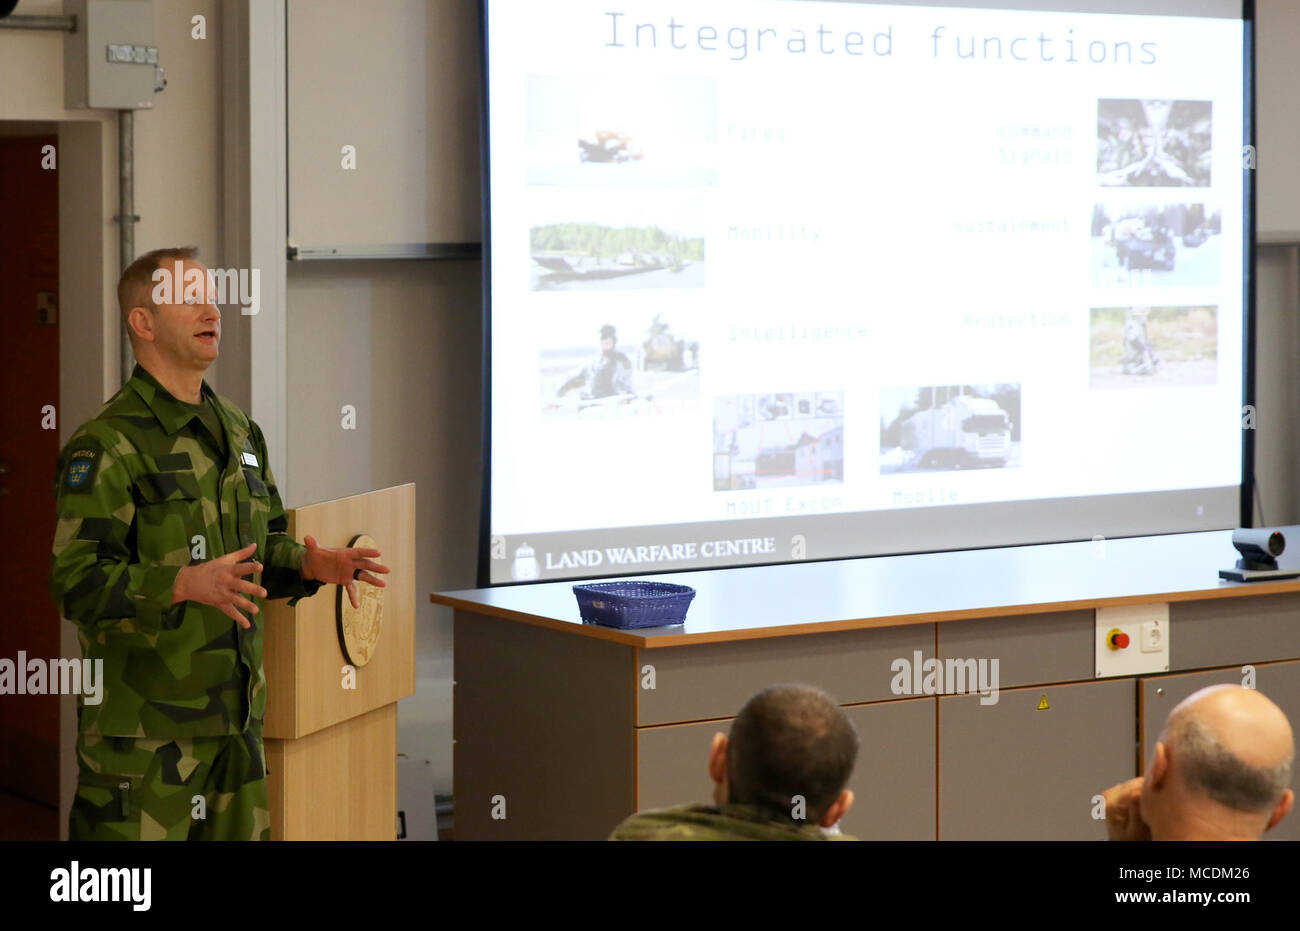 Swedish Army Lt. Col. Joakin Karlquist addresses the group during the first ever 7th Army Training Command's Conference of European Training Centers at the Joint Multinational Readiness Center, Hohenfels, Germany, Feb. 15, 2018. The three-day conference consisted of approximately 65 senior military leaders from 27 NATO and Partner Nation countries. (U.S. Army photo by Staff Sgt. David Overson) Stock Photo